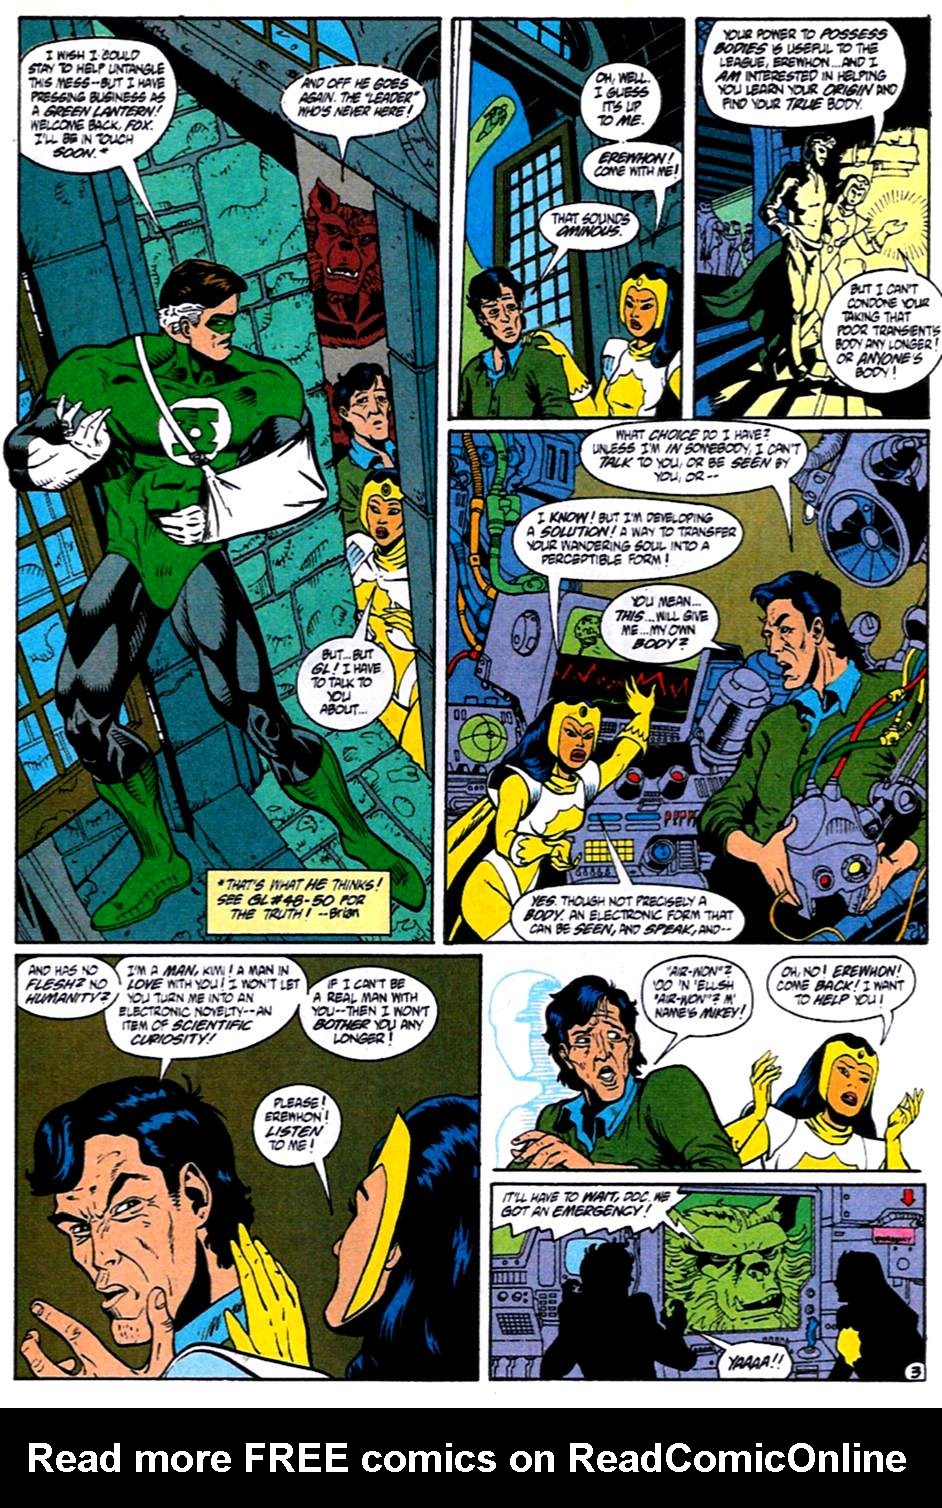 Justice League International (1993) 61 Page 3